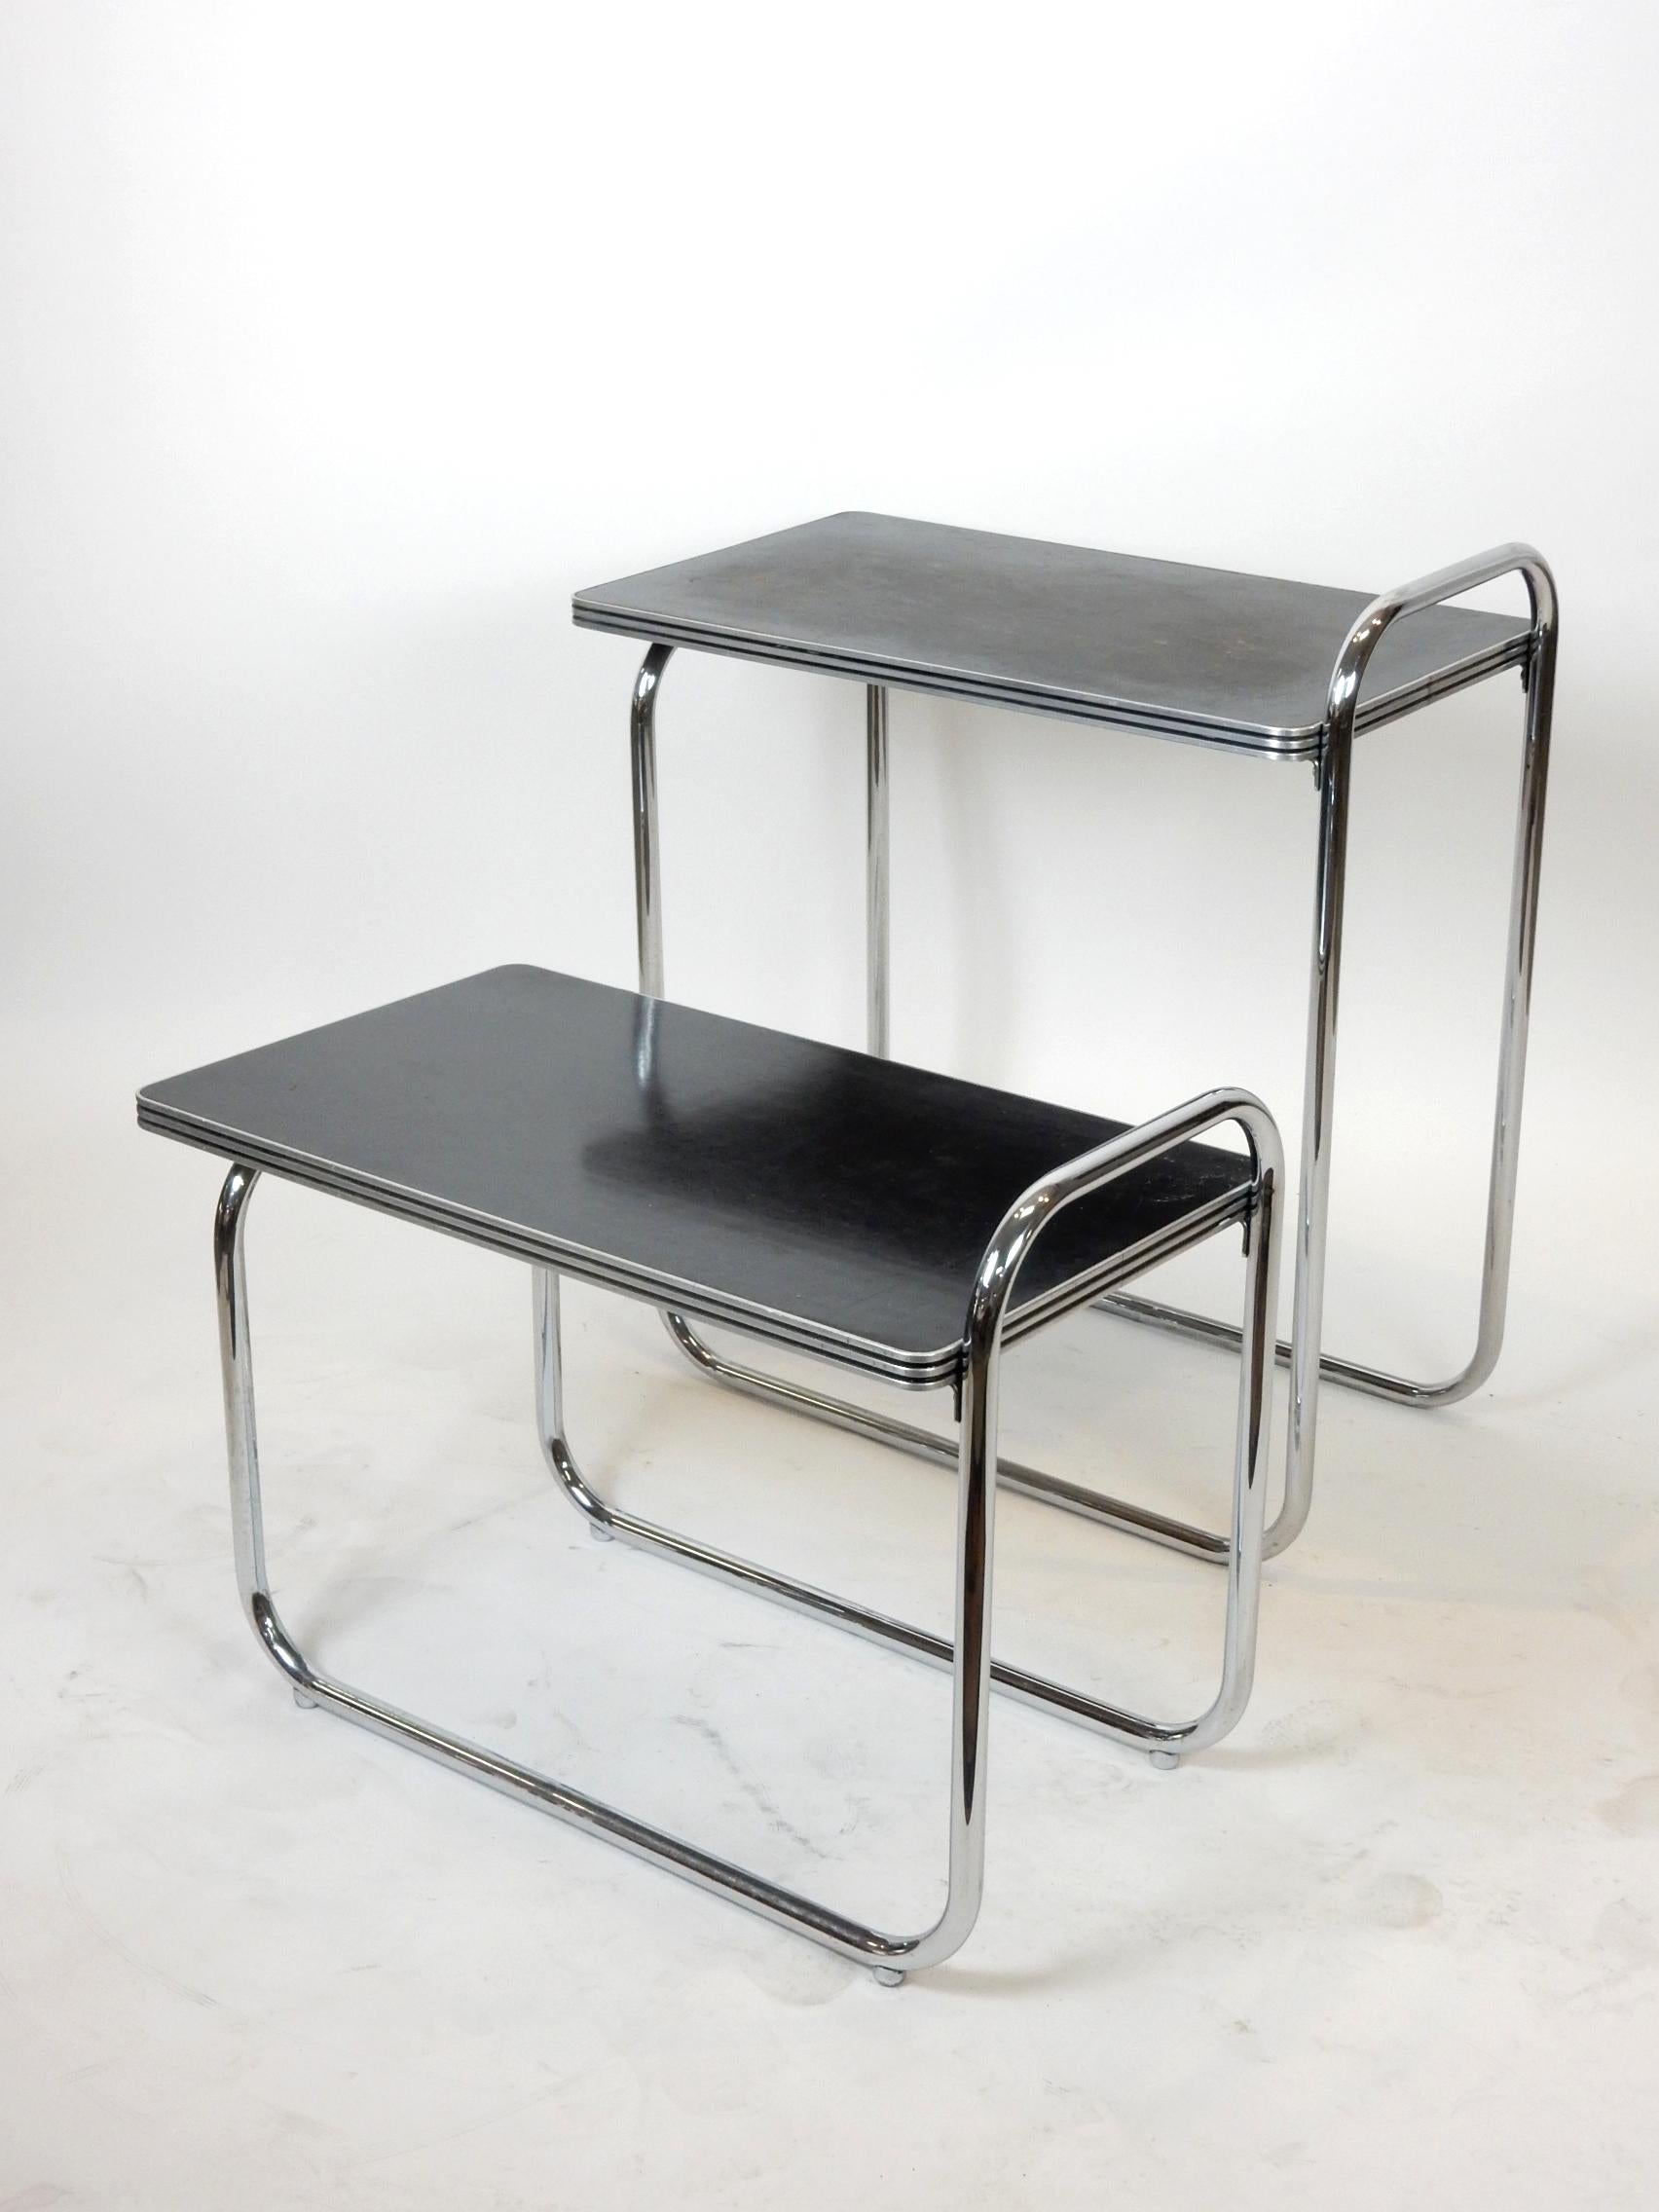 Art Deco Era Chrome Nesting Tables Gilbert Rohde design for Troy Sunshade Co. In Fair Condition For Sale In Las Vegas, NV